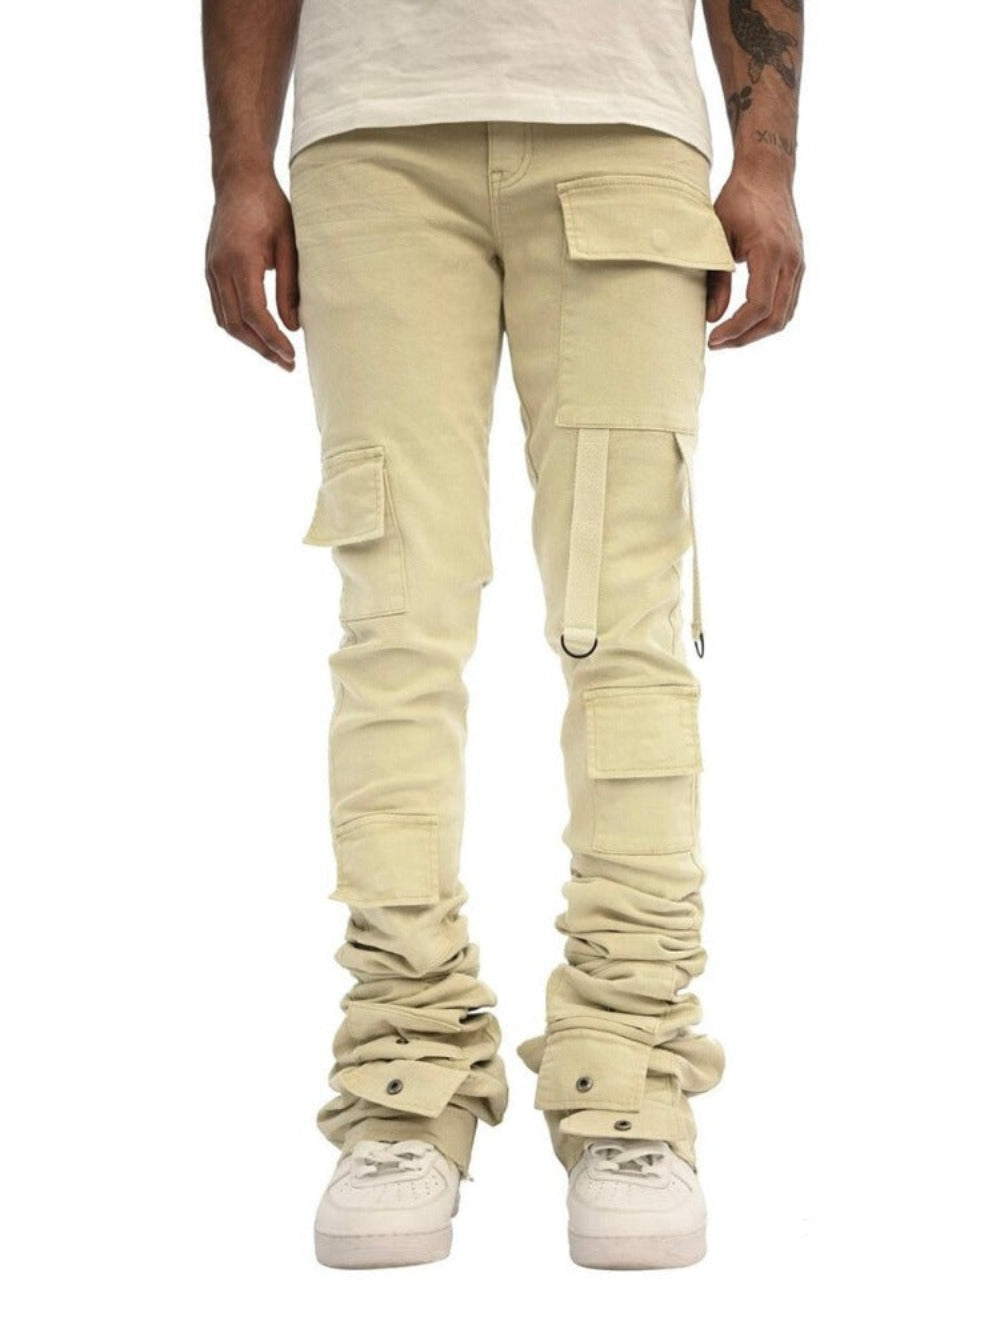 Gunner-Khaki Super Stacked Cargo Pants with Straps